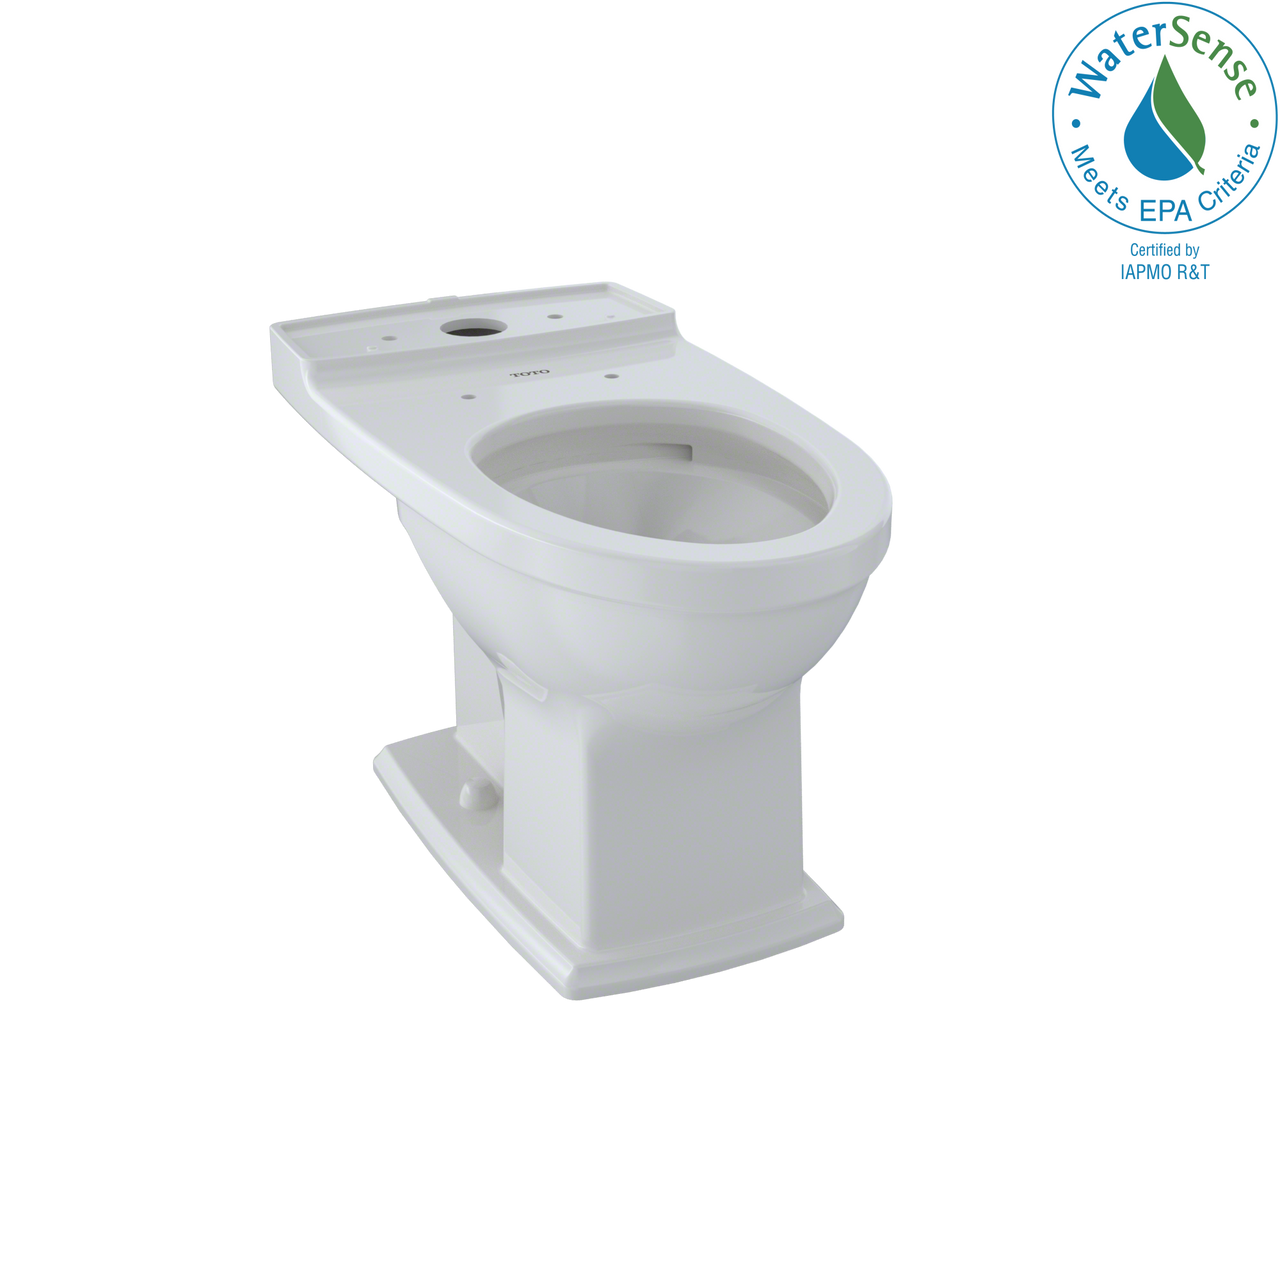 TOTO Connelly Universal Height Elongated Toilet Bowl with CeFiONtect,   - CT494CEFG#11 - BNGBath